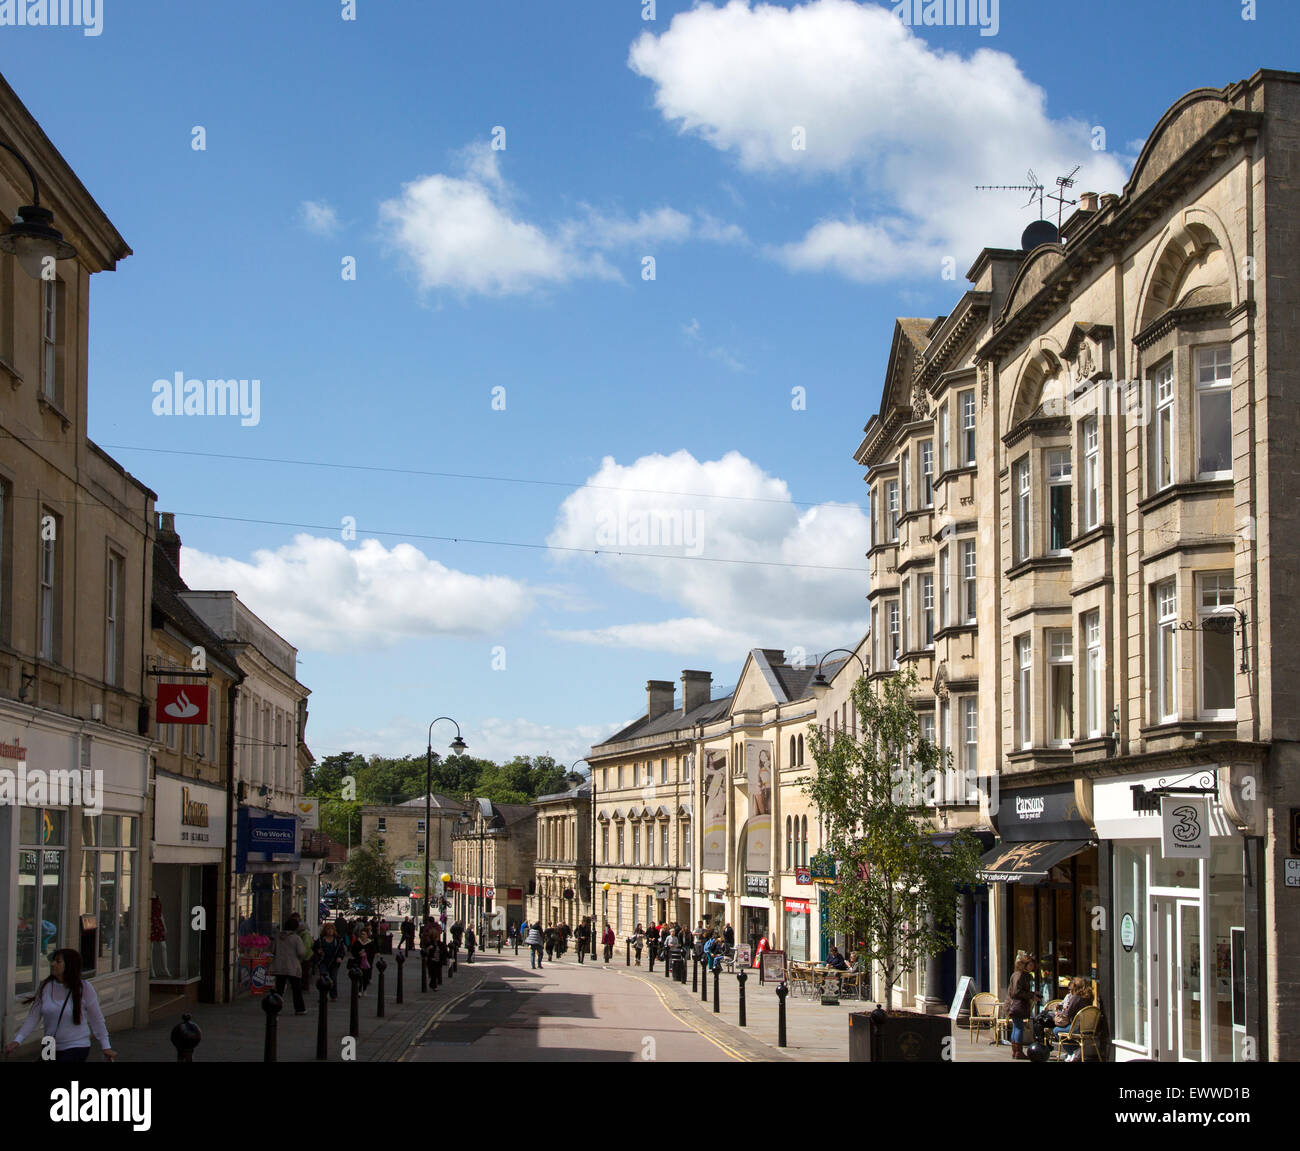 Main shopping High Street in town centre, Chippenham, Wiltshire, England, UK Stock Photo